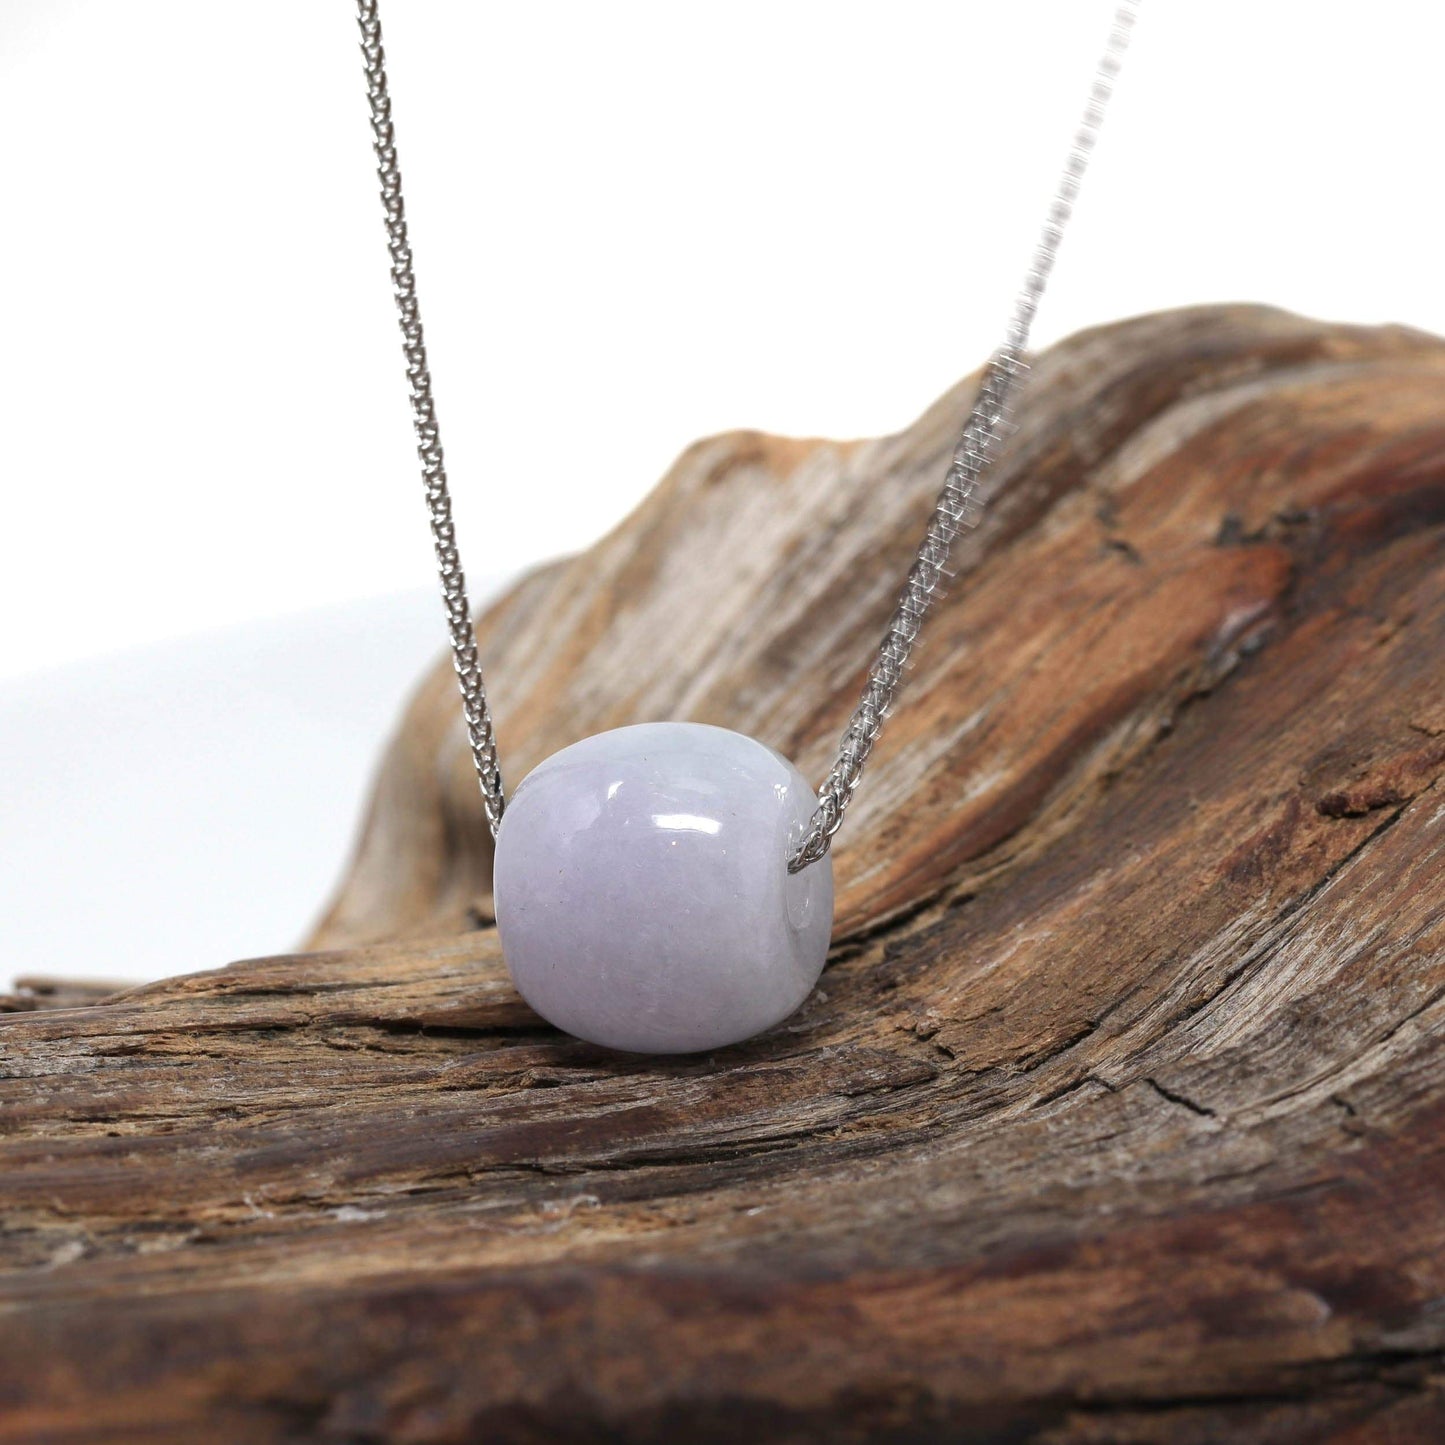 RealJade® "Good Luck Button" Necklace Real Lavender Jade Lucky TongTong Donut Pendant Necklace